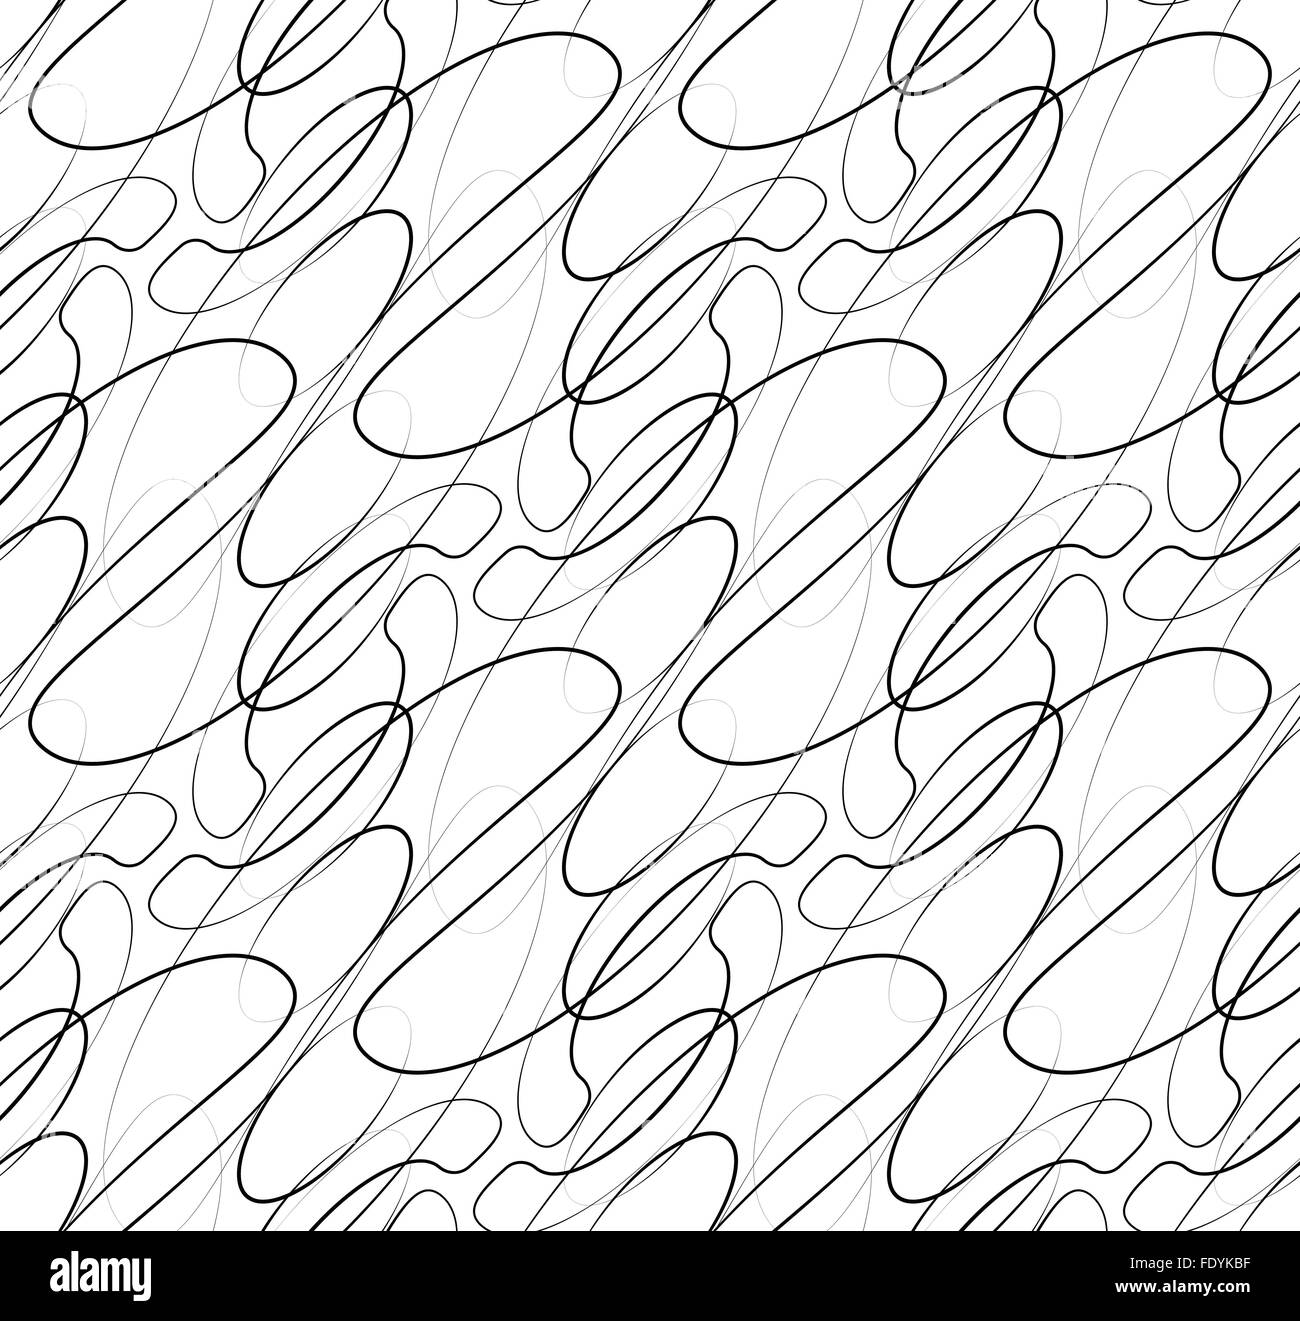 Abstract seamless background / pattern with squiggly lines. Monochrome ...